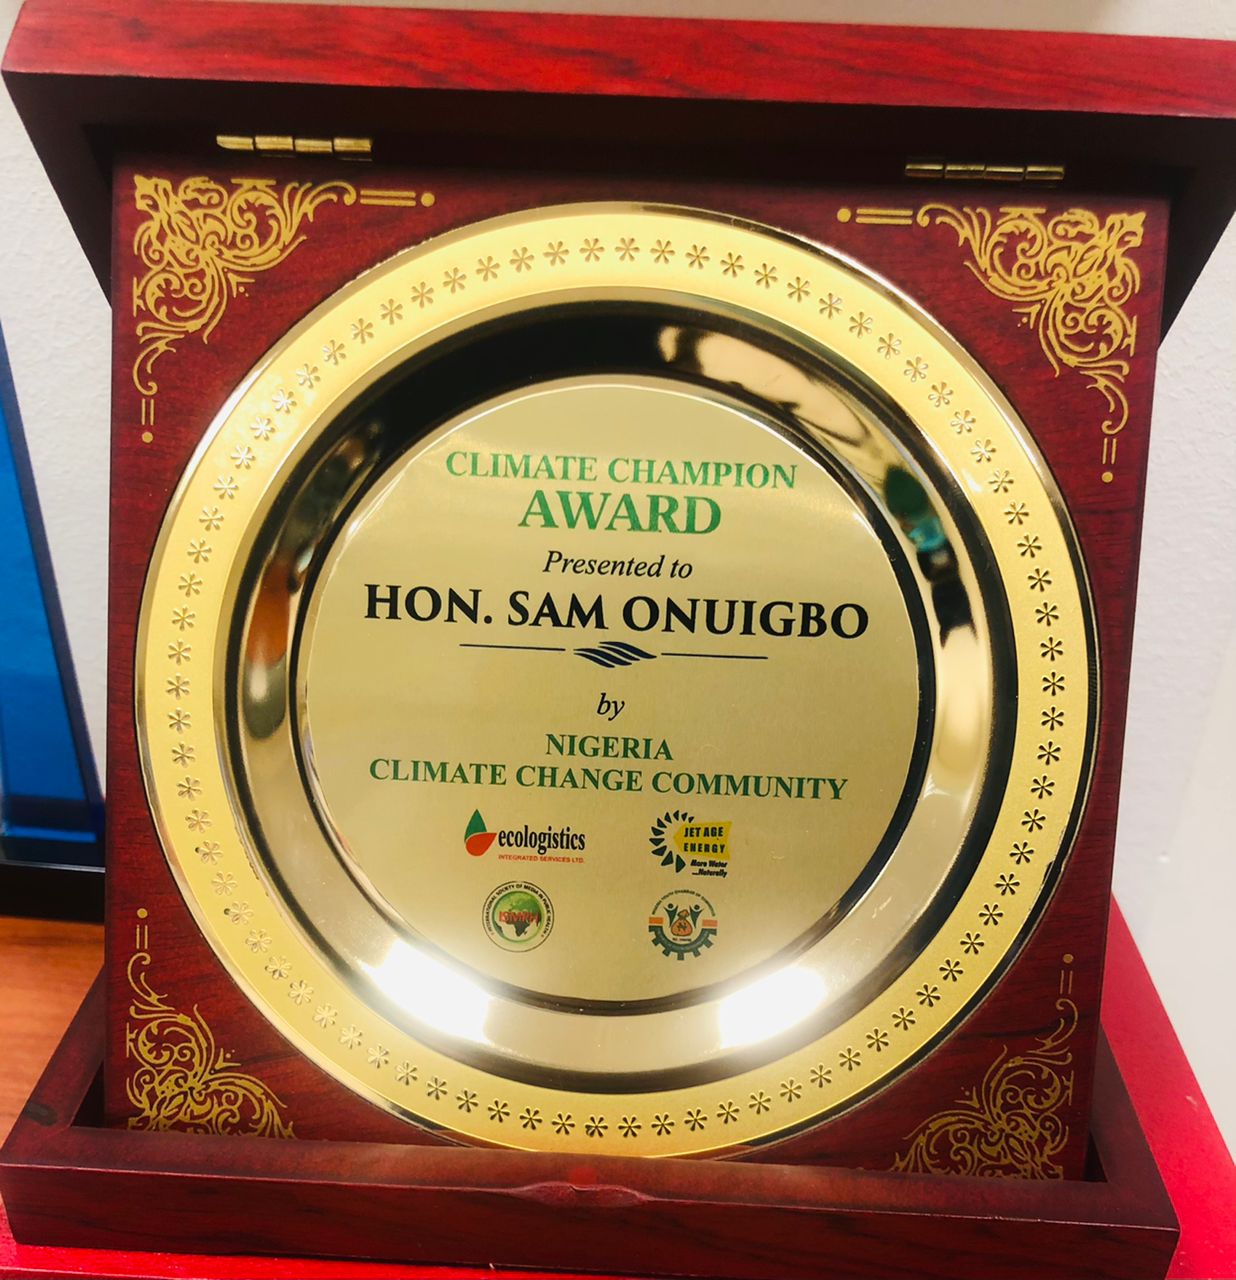 Rep Onuigbo Honoured With Award Of 'Climate Champion' In Abuja